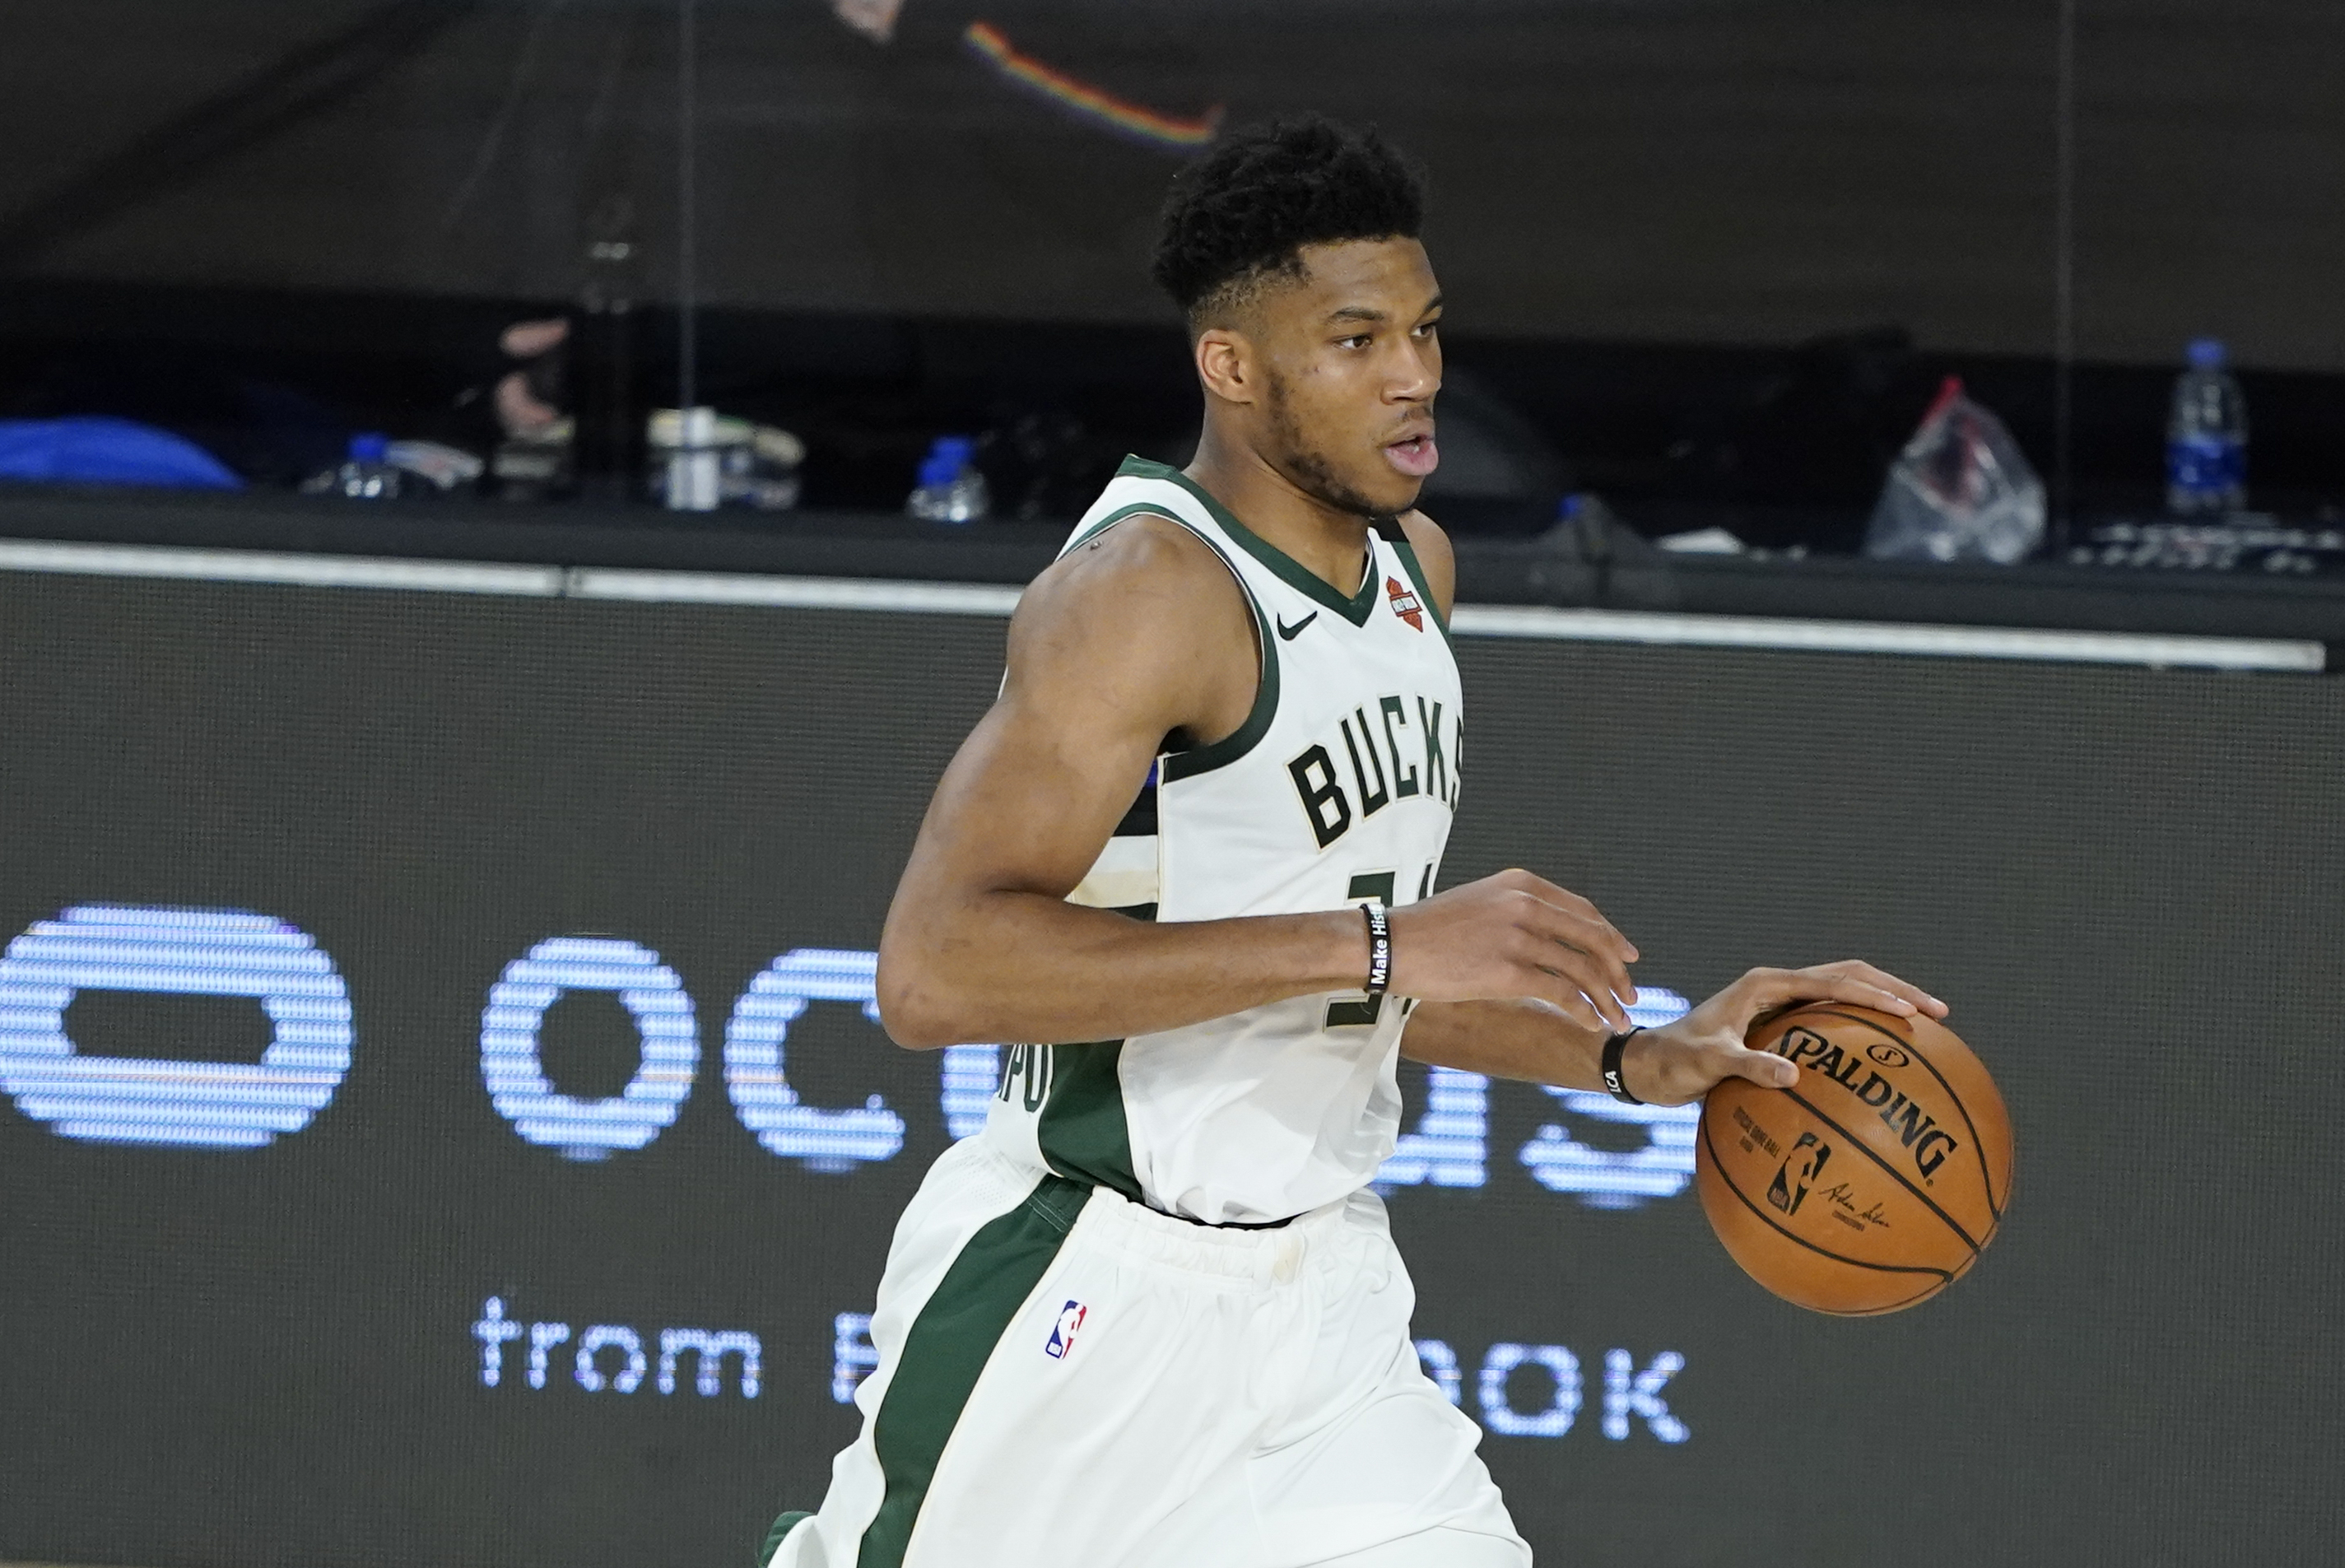 How much money could Giannis Antetokounmpo make by signing a supermax contract extension with the Milwaukee Bucks.